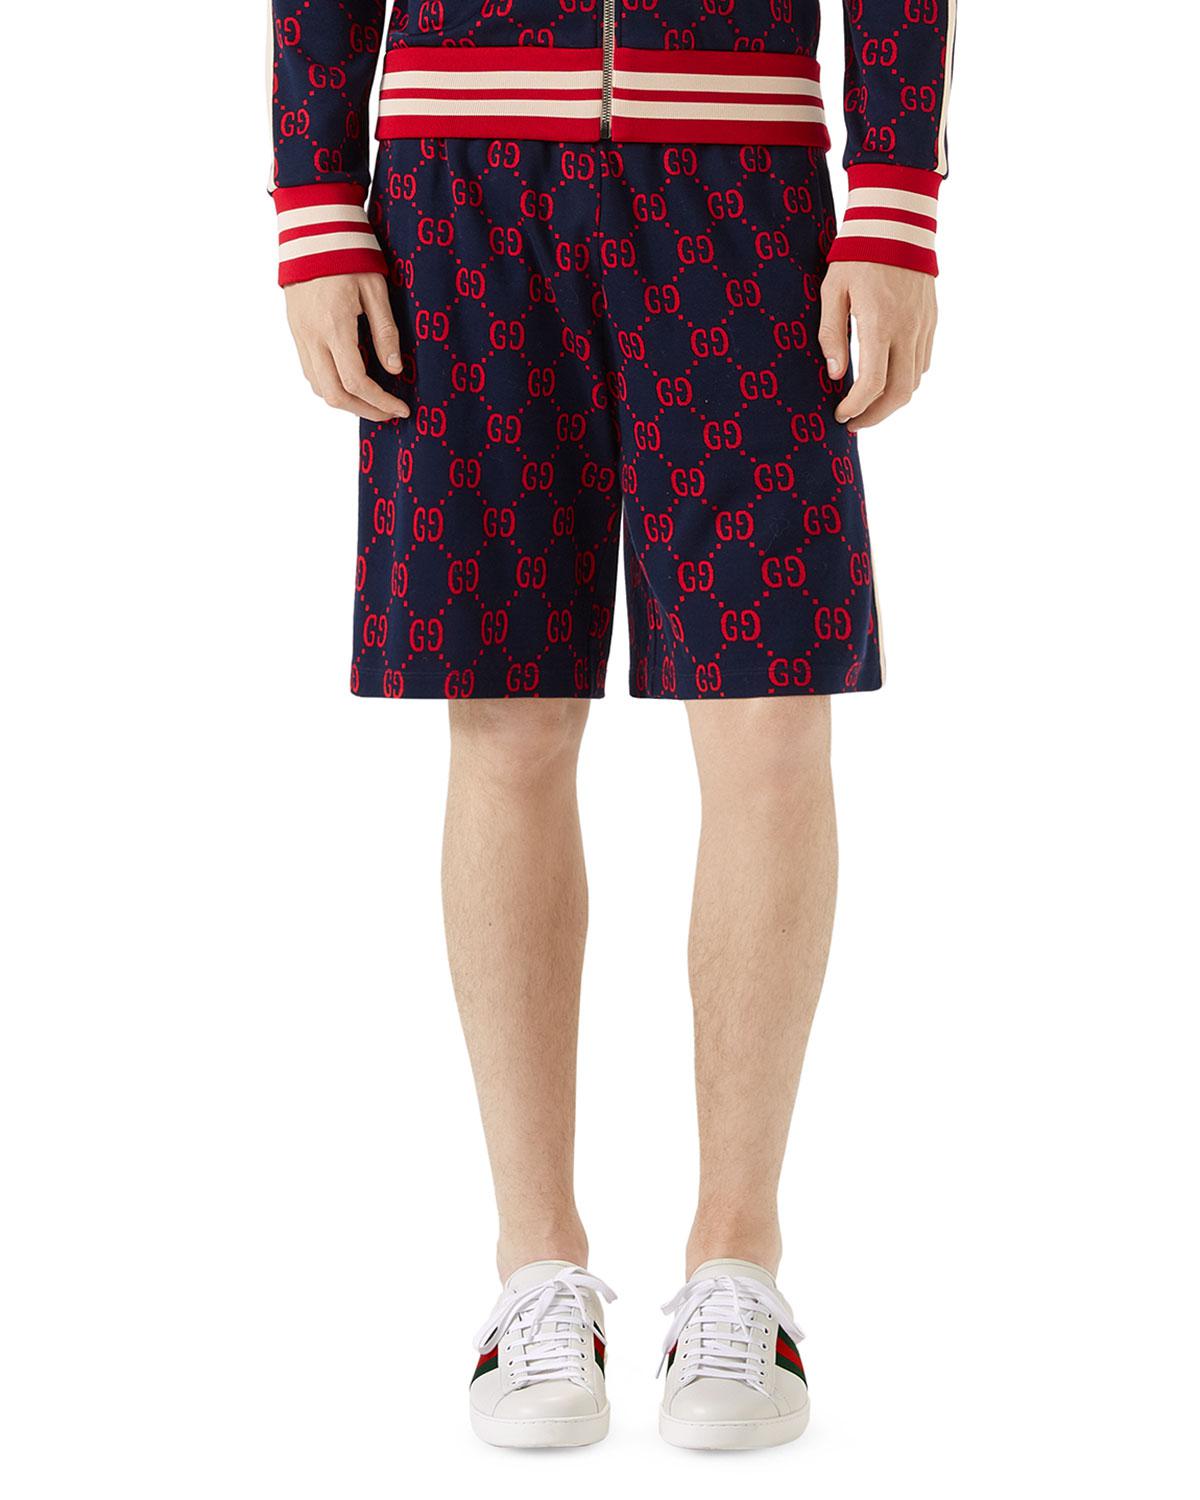 Gucci Cotton Gg Jacquard Shorts in Sky (Blue) for Men - Lyst